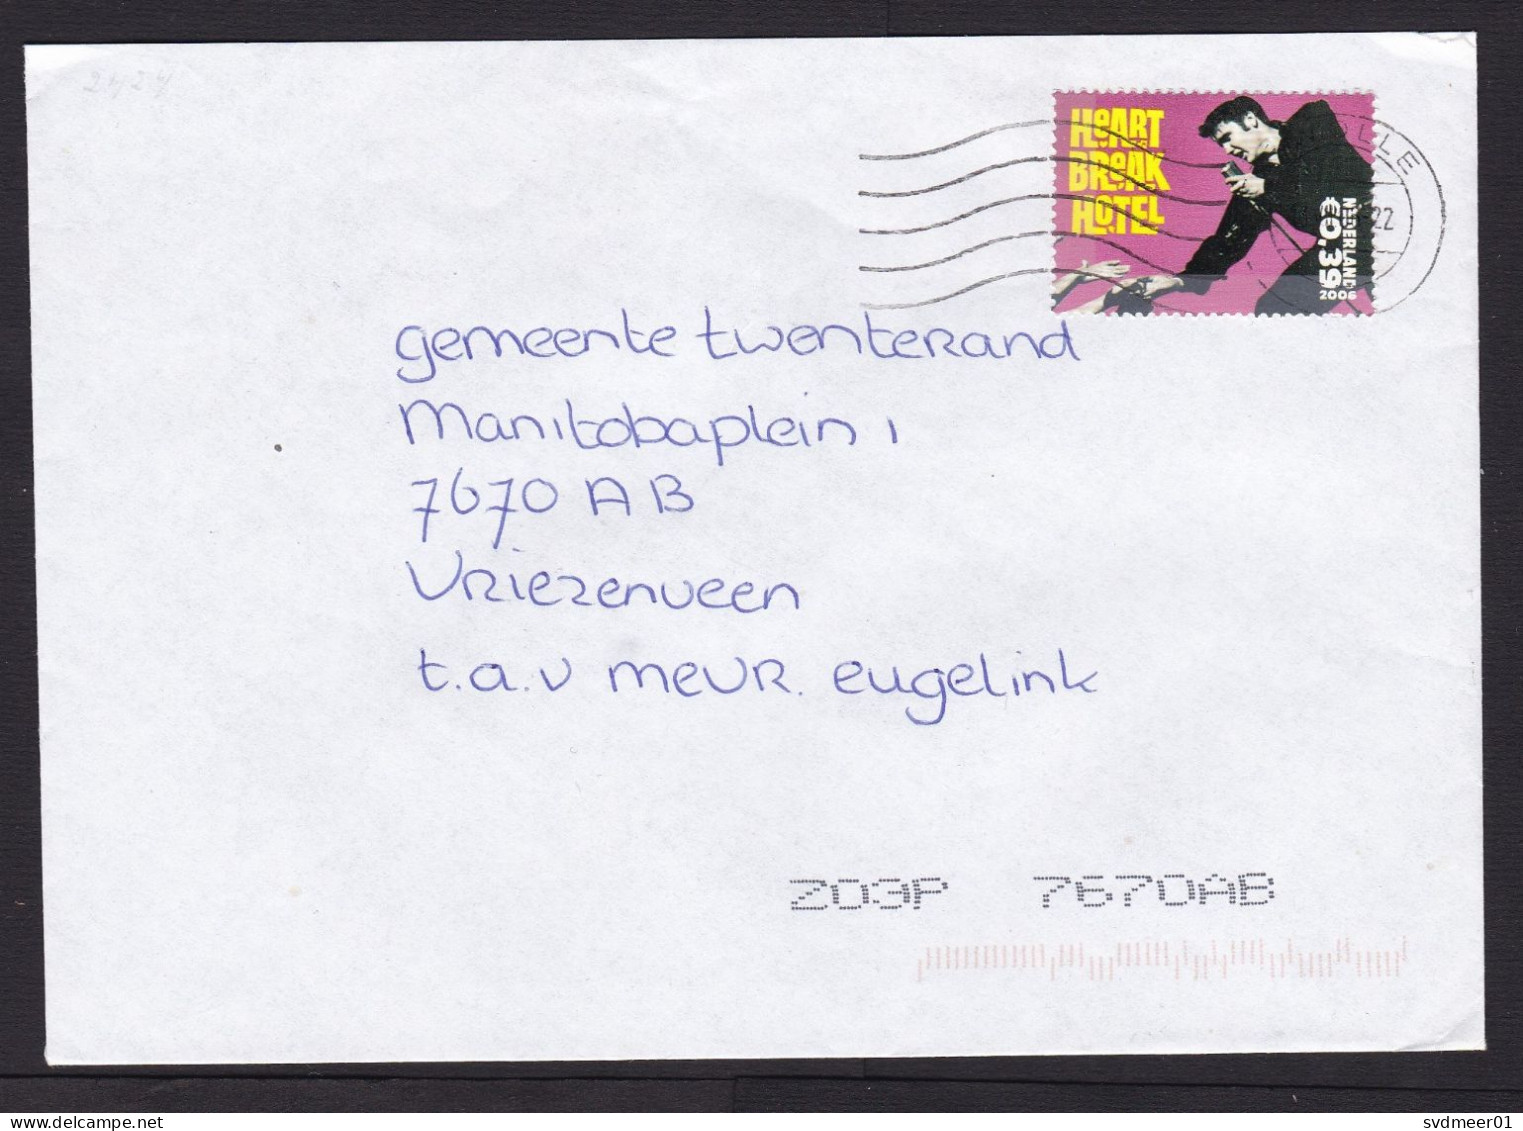 Netherlands: Cover, 2006, 1 Stamp, Elvis Presley, Heartbreak Hotel, Music, Song, Singer (traces Of Use) - Lettres & Documents